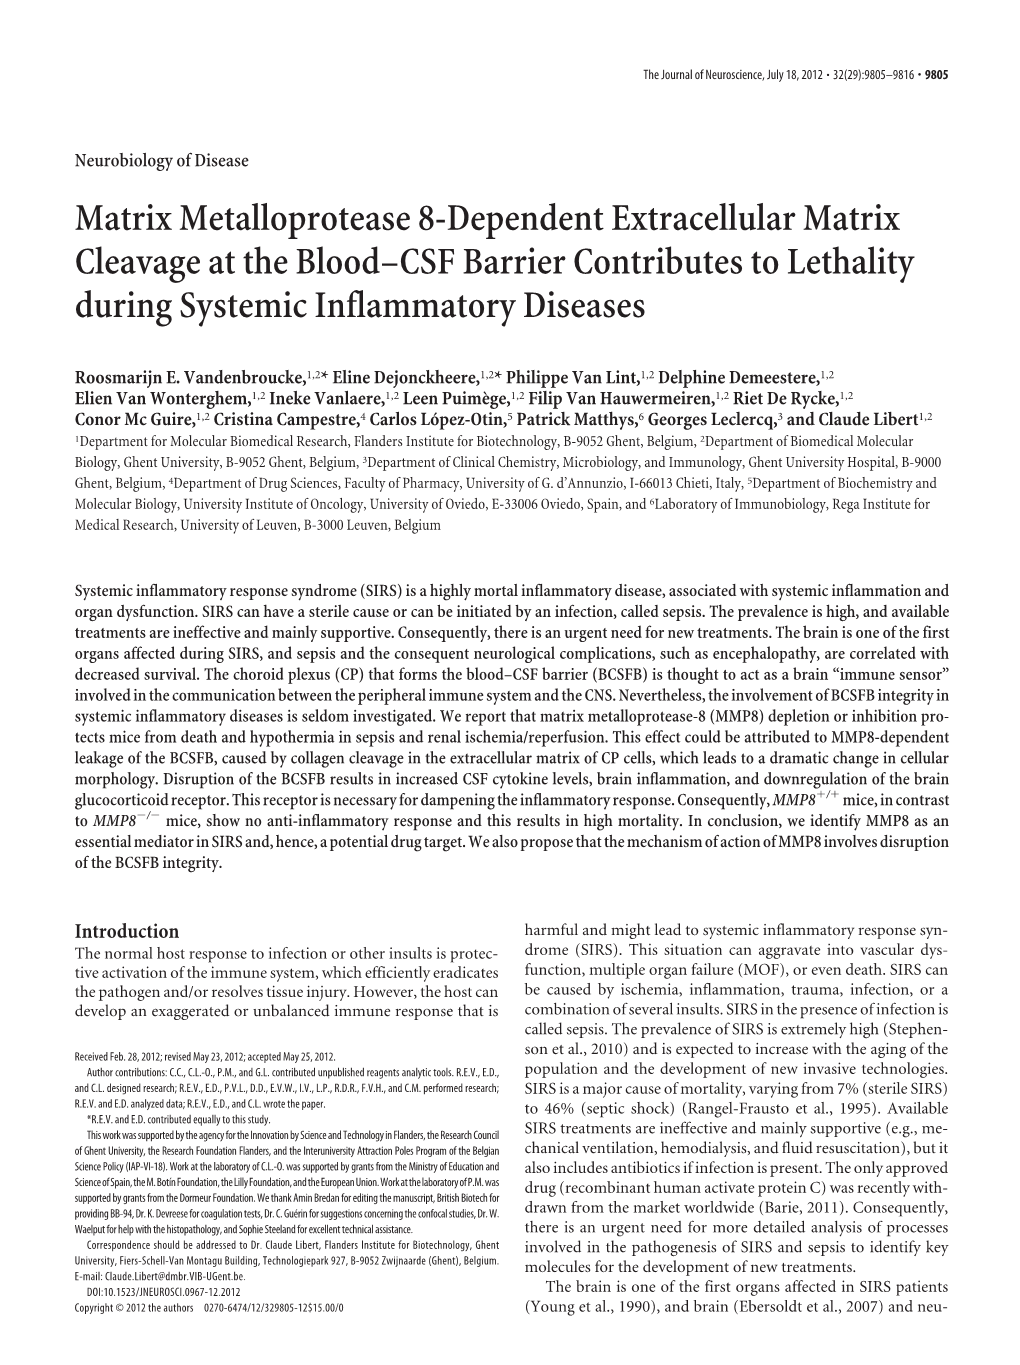 Matrix Metalloprotease 8-Dependent Extracellular Matrix Cleavage at the Blood–CSF Barrier Contributes to Lethality During Systemic Inflammatory Diseases